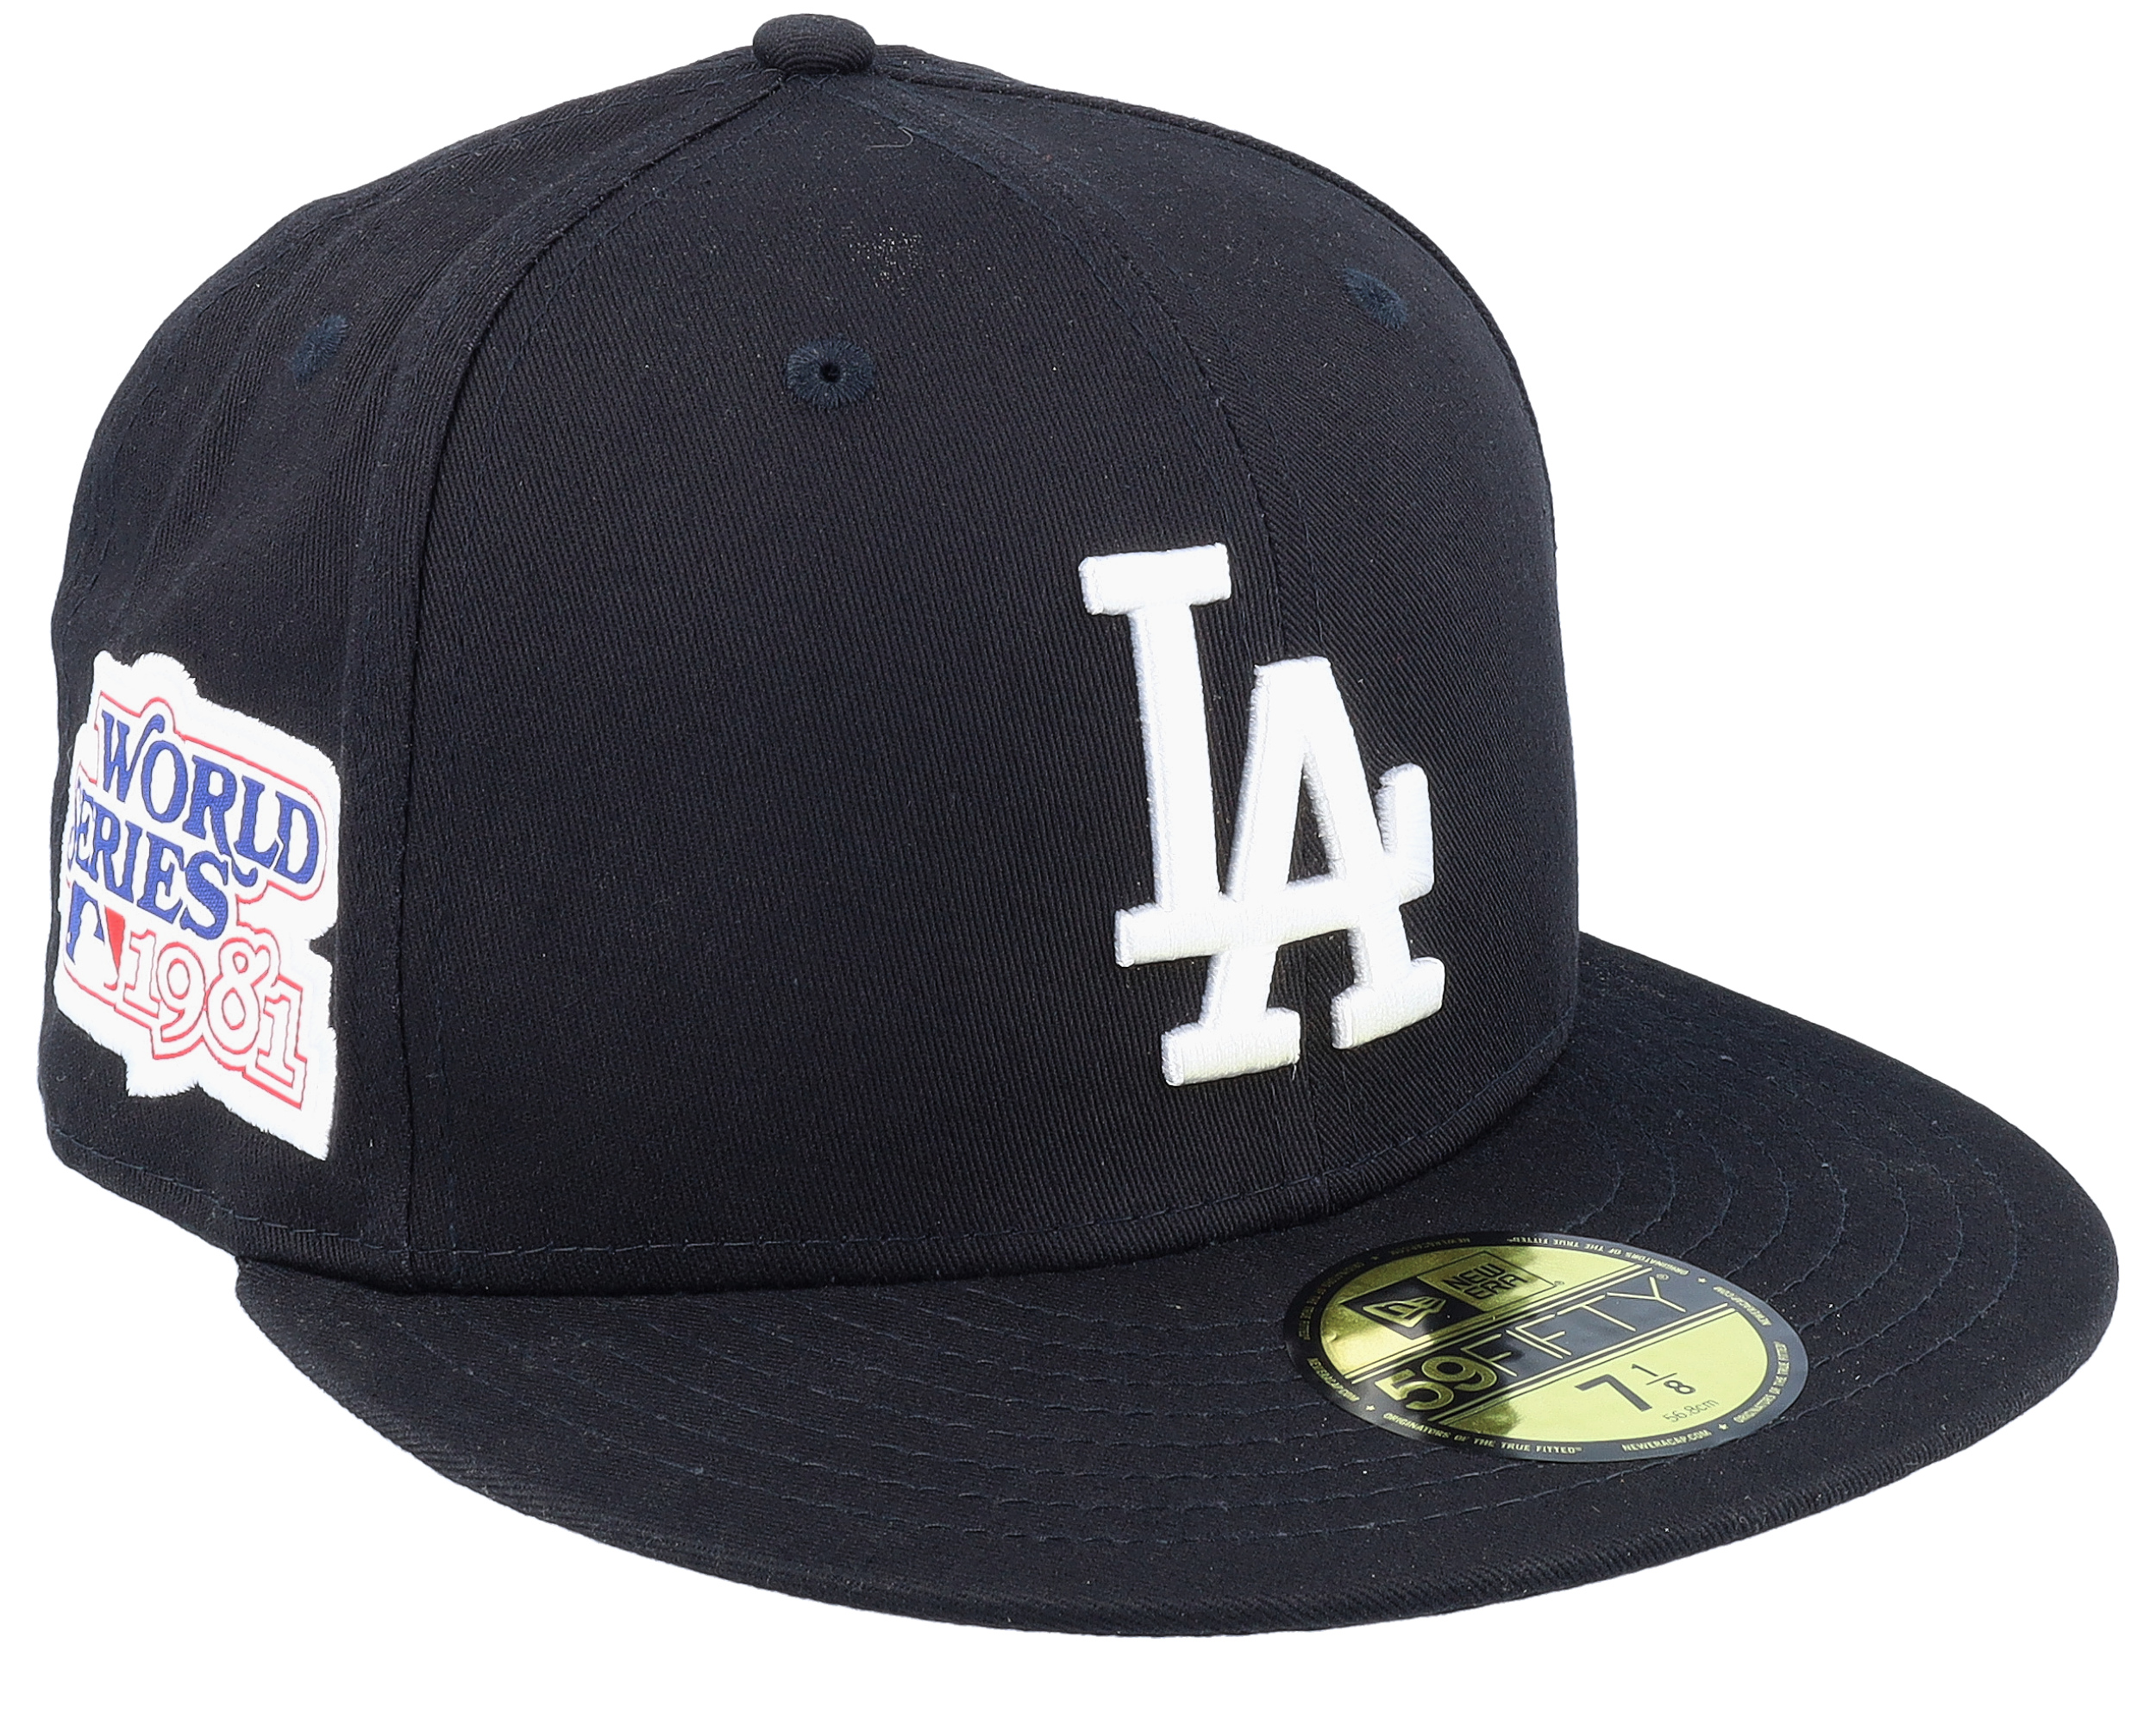 New Era - MLB Grey fitted Cap - New York Yankees Side Patch 59FIFTY Grey/Navy Fitted @ Hatstore